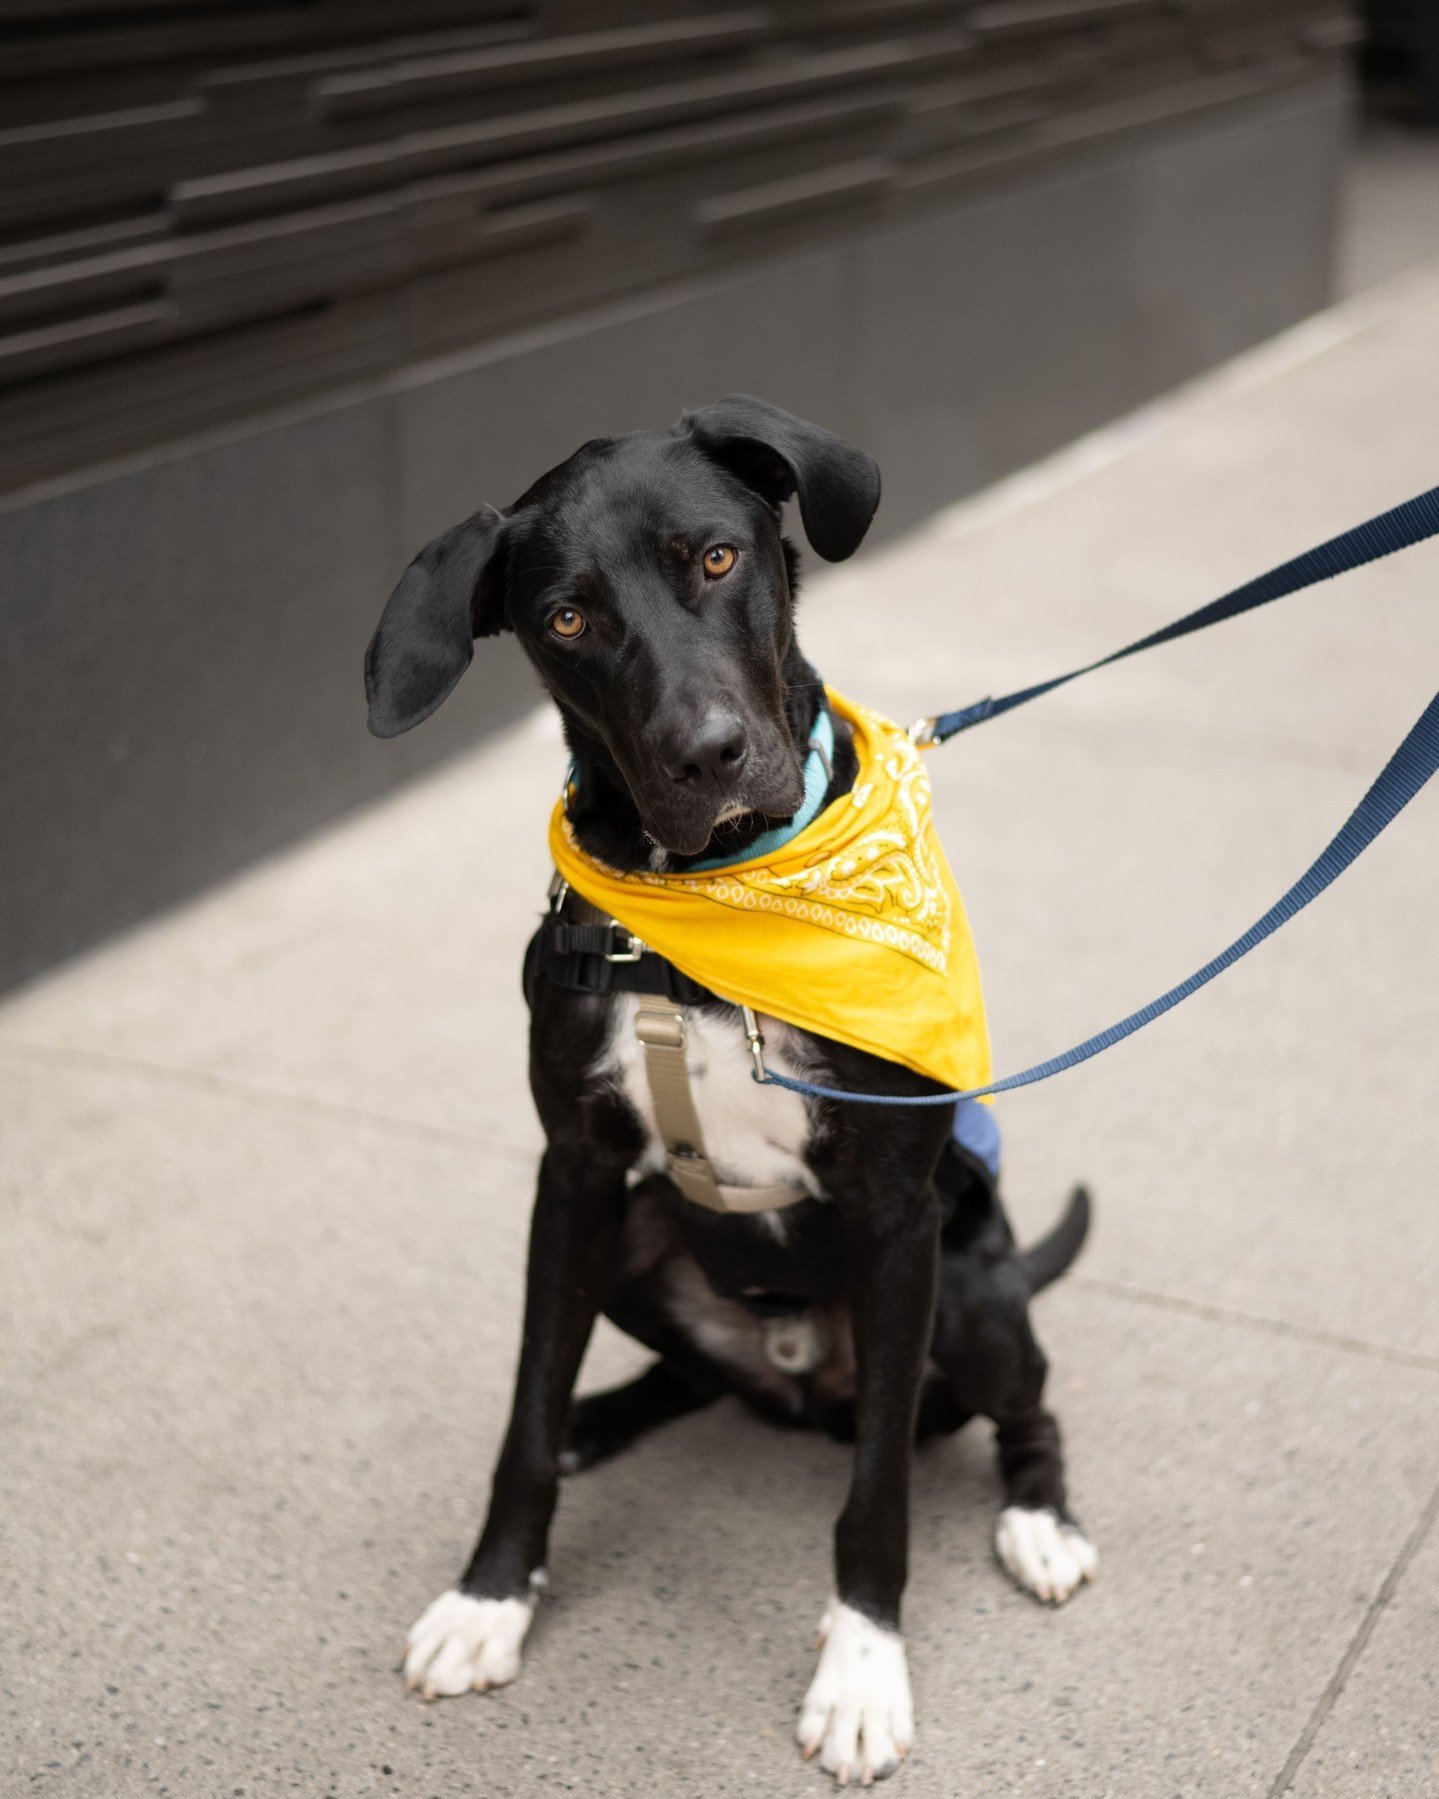 We know a lot of you are looking for a man in finance with a trust fund but can we interest you in a very tall, 81-pound, 2-year-old love bug named Rollo? 😉

He may not have blue eyes but he certainly is easy on the eyes, easy going and will be as d